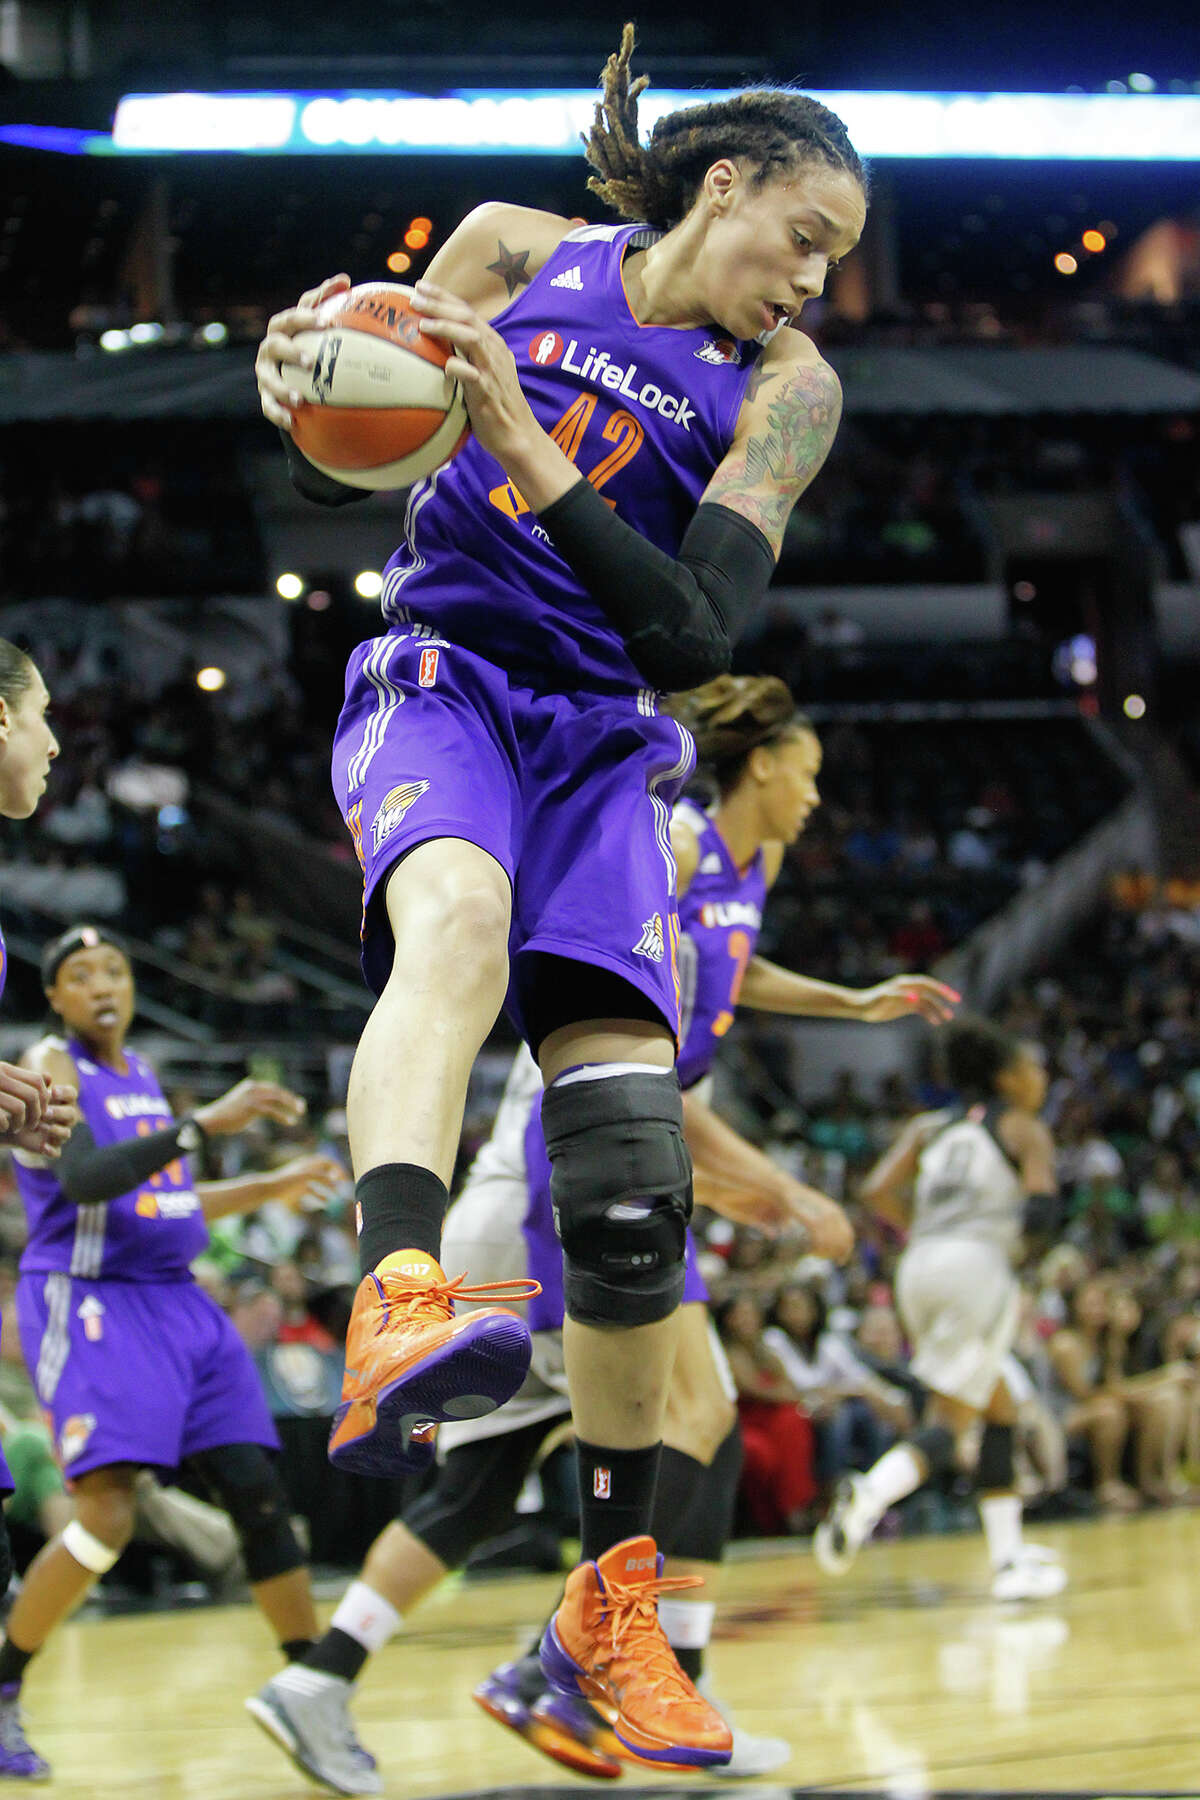 Phoenix's Brittney Griner pulls down a rebound in the first half of the Silver Stars game with the Phoenix Mercury at the AT&T Center on Tuesday, June 25, 2013. The game was former Baylor standout Brittney Griner's first trip to play in her home state. The Mercury won the game 83-77. MARVIN PFEIFFER/ mpfeiffer@express-news.net